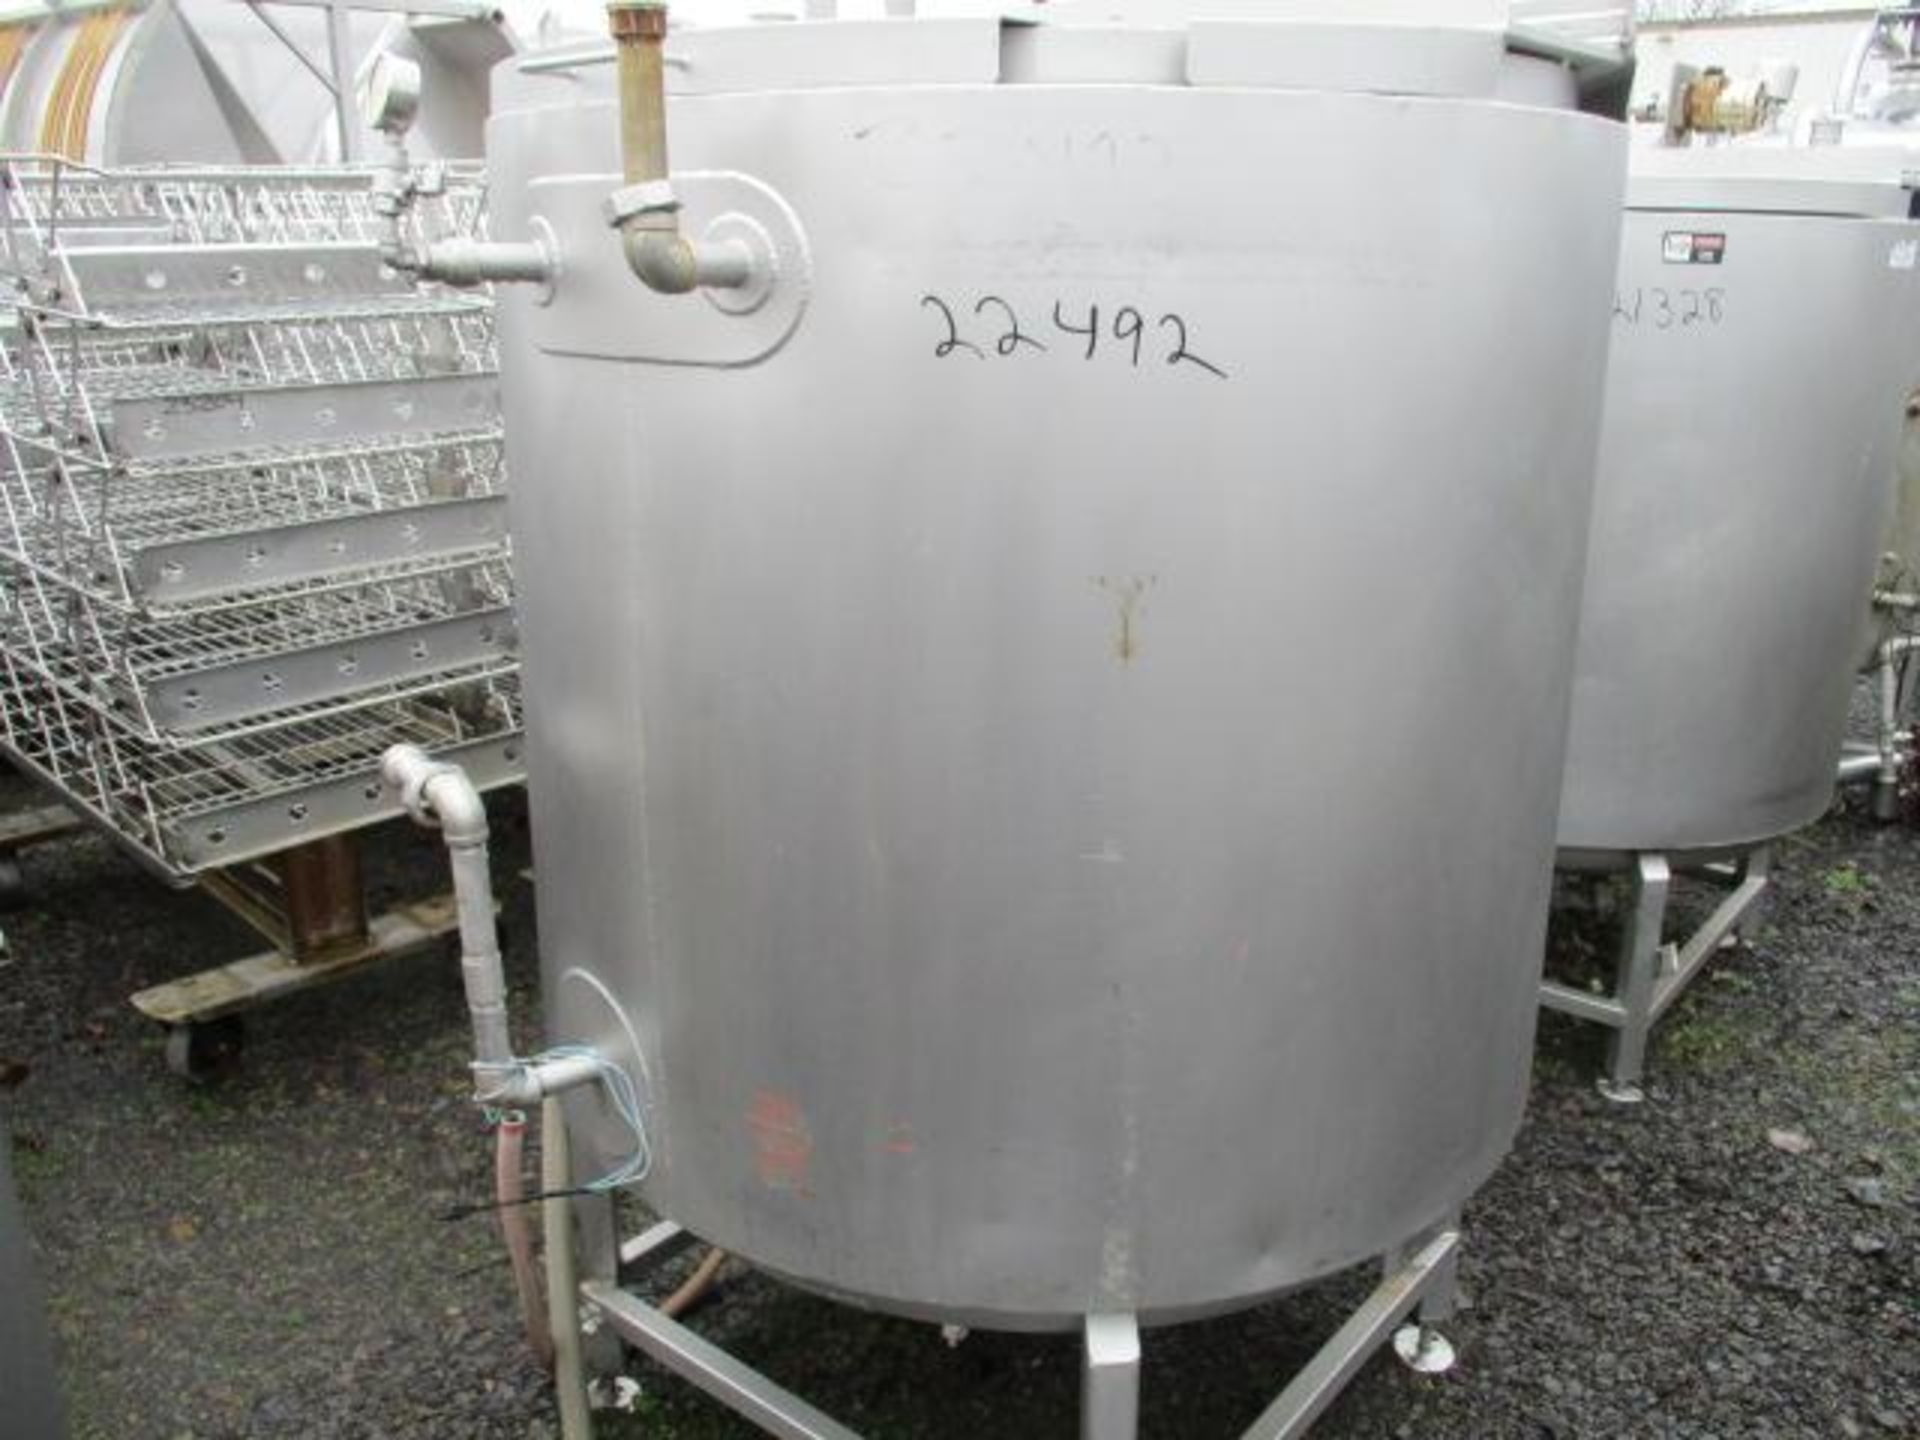 300 GALLON JACKETED STAINLESS STEEL TANK, MEASURES 4' DEEP AND 44" DIAMETER